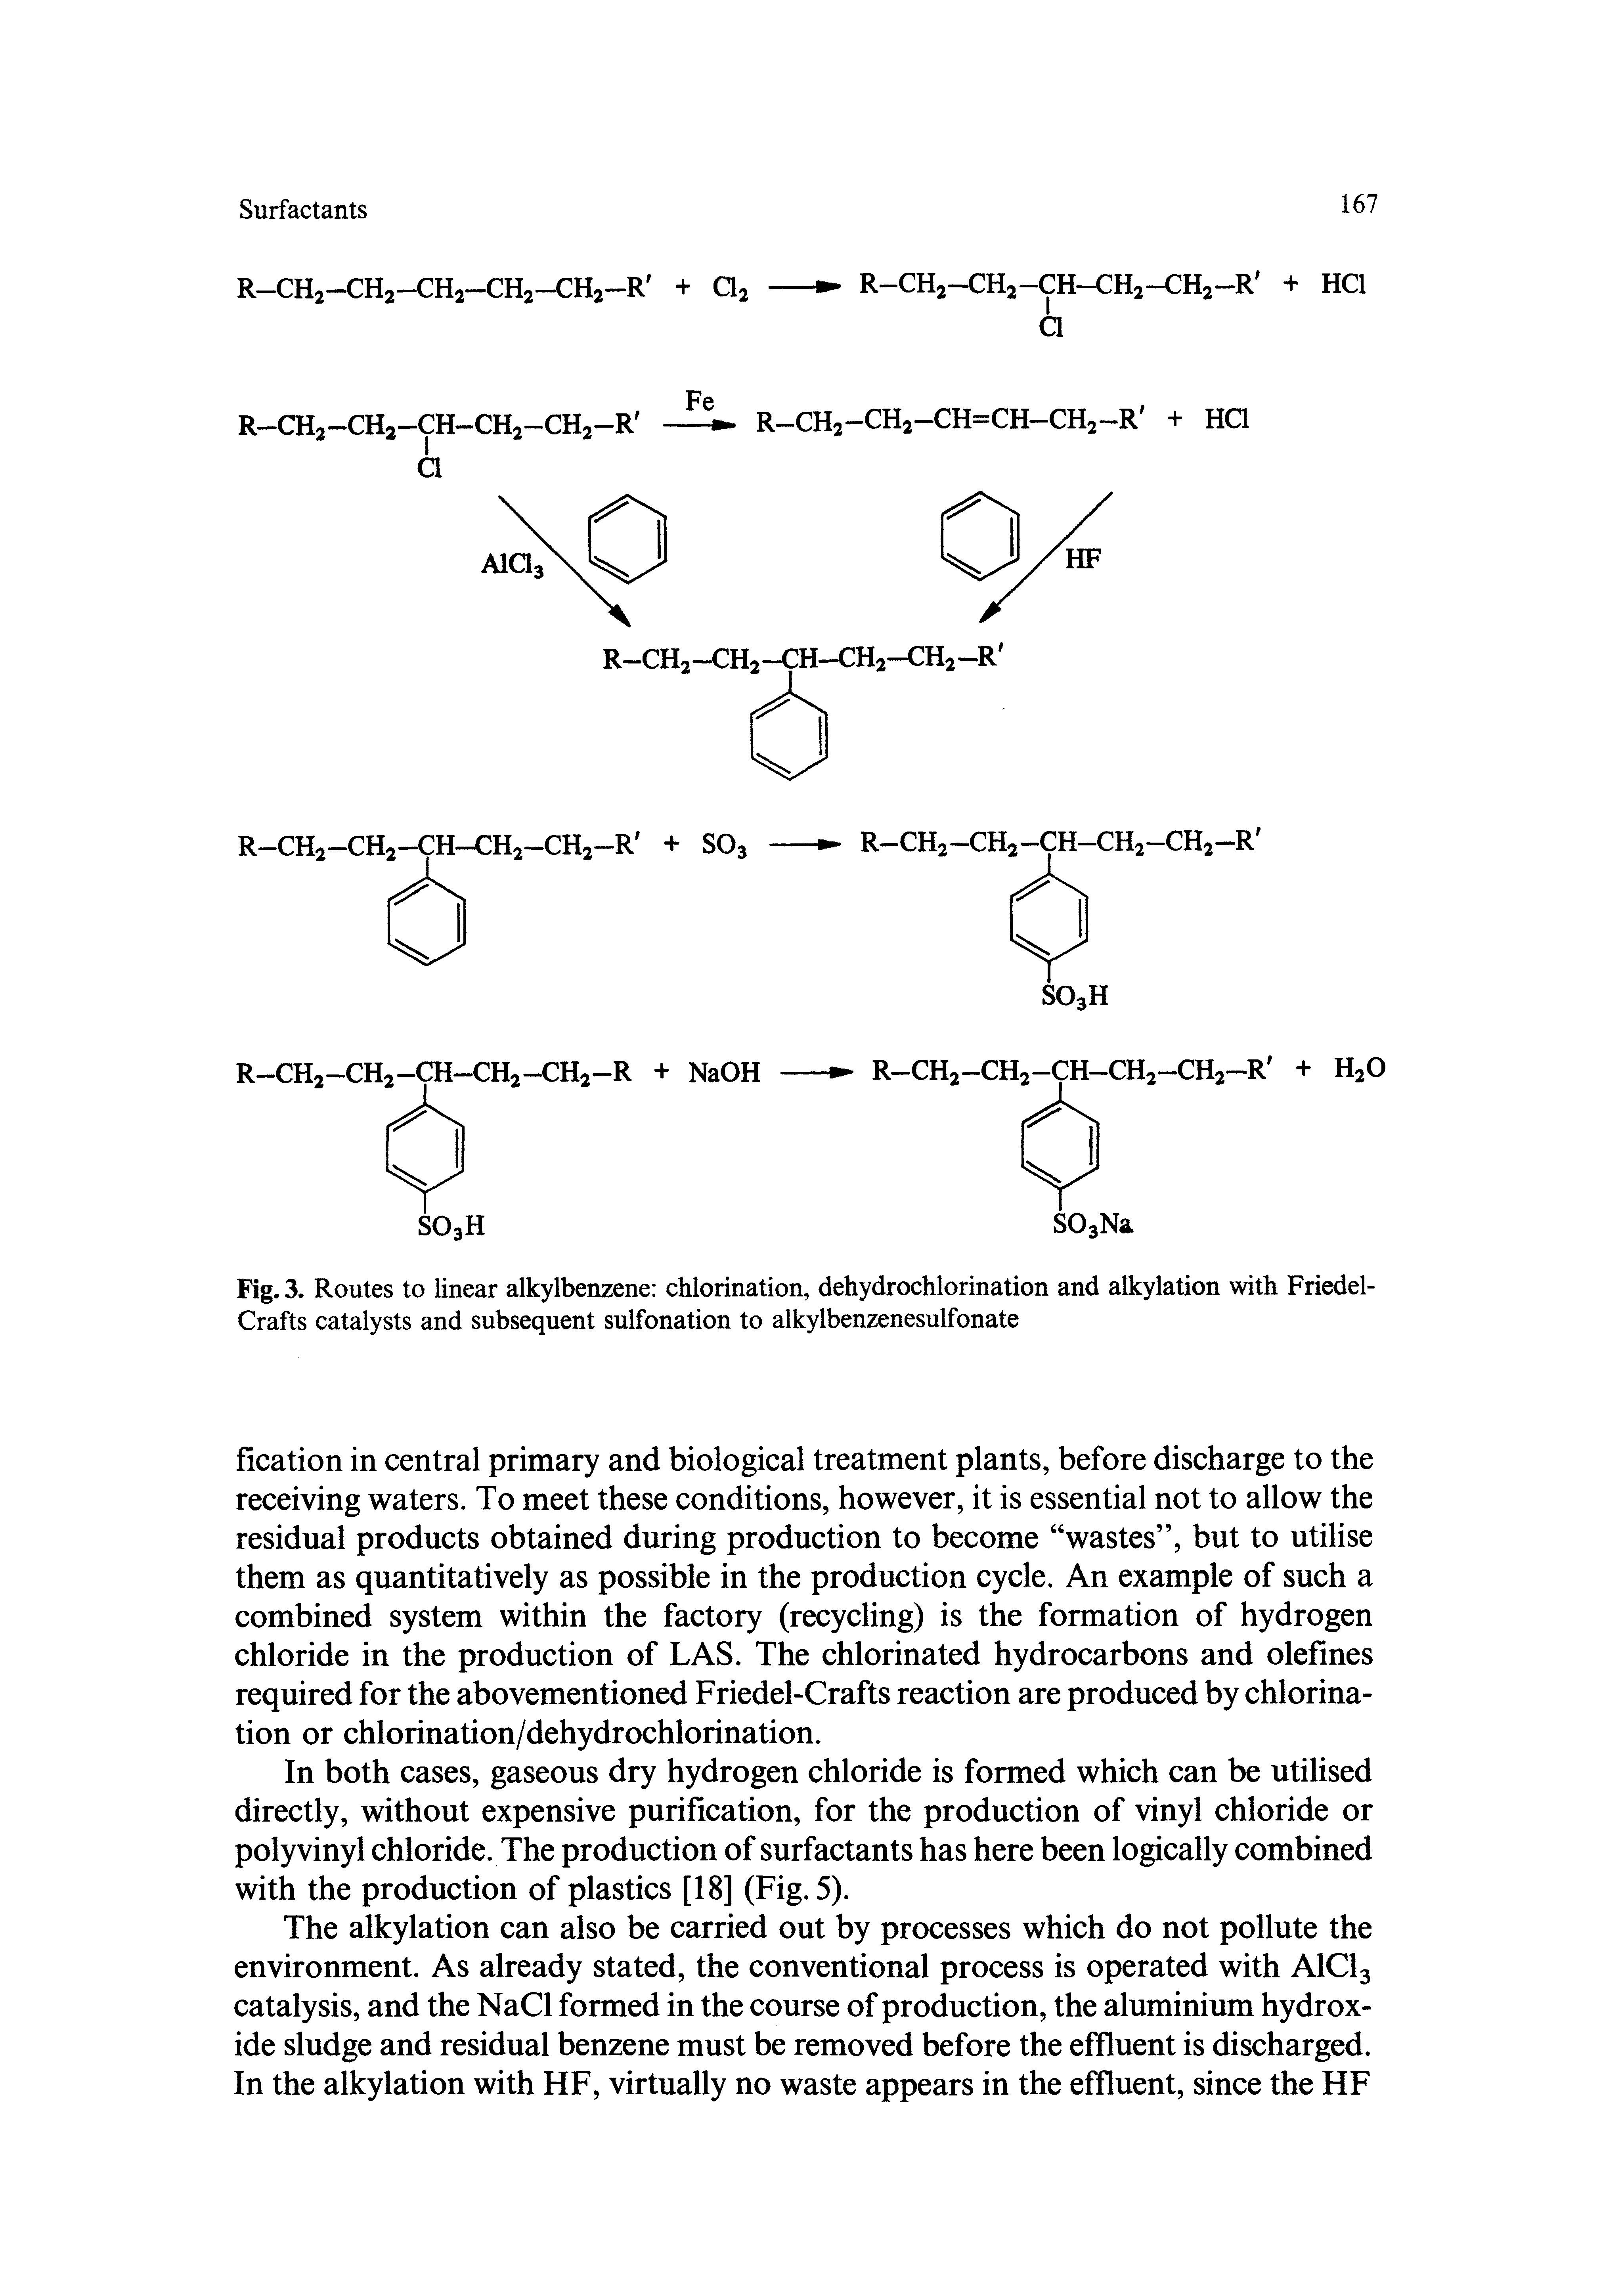 Fig. 3. Routes to linear alkylbenzene chlorination, dehydrochlorination and alkylation with Friedel-Crafts catalysts and subsequent sulfonation to alkylbenzenesulfonate...